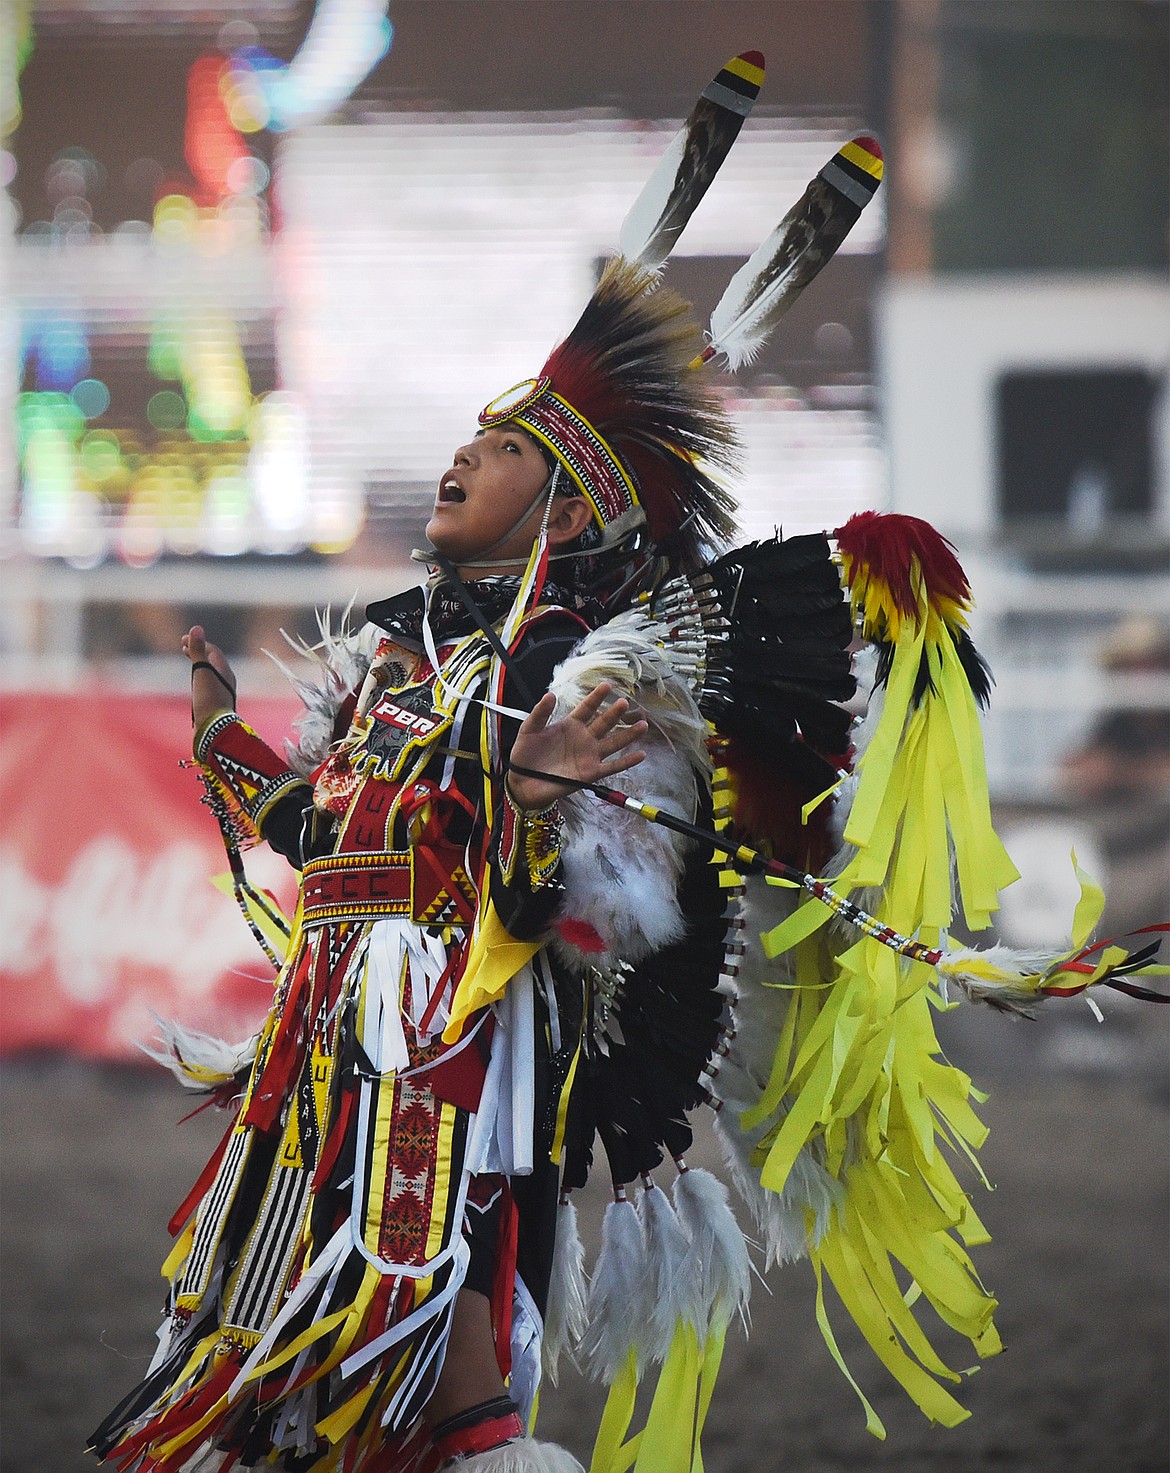 Joshua Skunkcap performs a ceremonial dance before the Indian Relay Races at the Northwest Montana Fair & Rodeo on Friday, Aug. 21. (Casey Kreider/Daily Inter Lake)